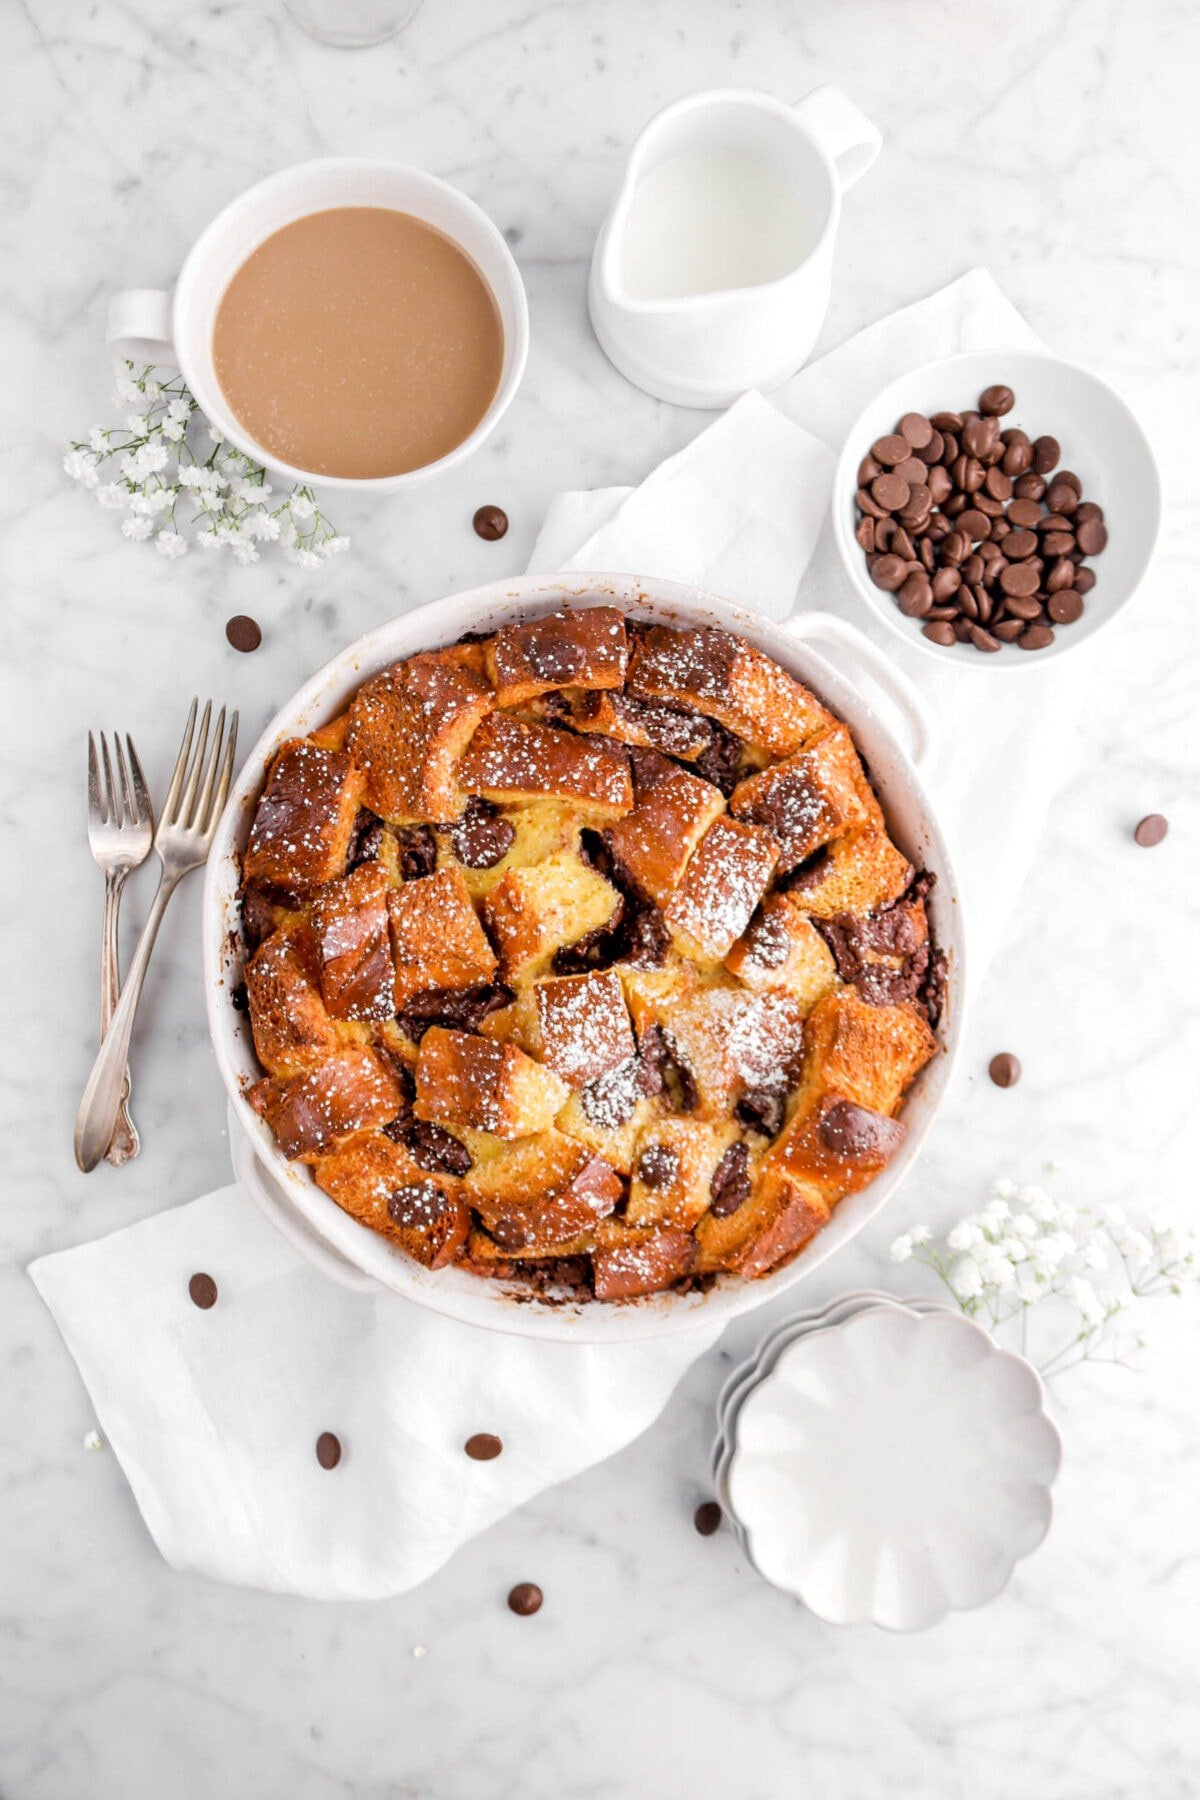 overhead shot of chocolate chip bread pudding in round casserole on white napkin with two forks, flowers, bowl of chocolate chips, cup of coffee, and white creamer beside with scalloped plates